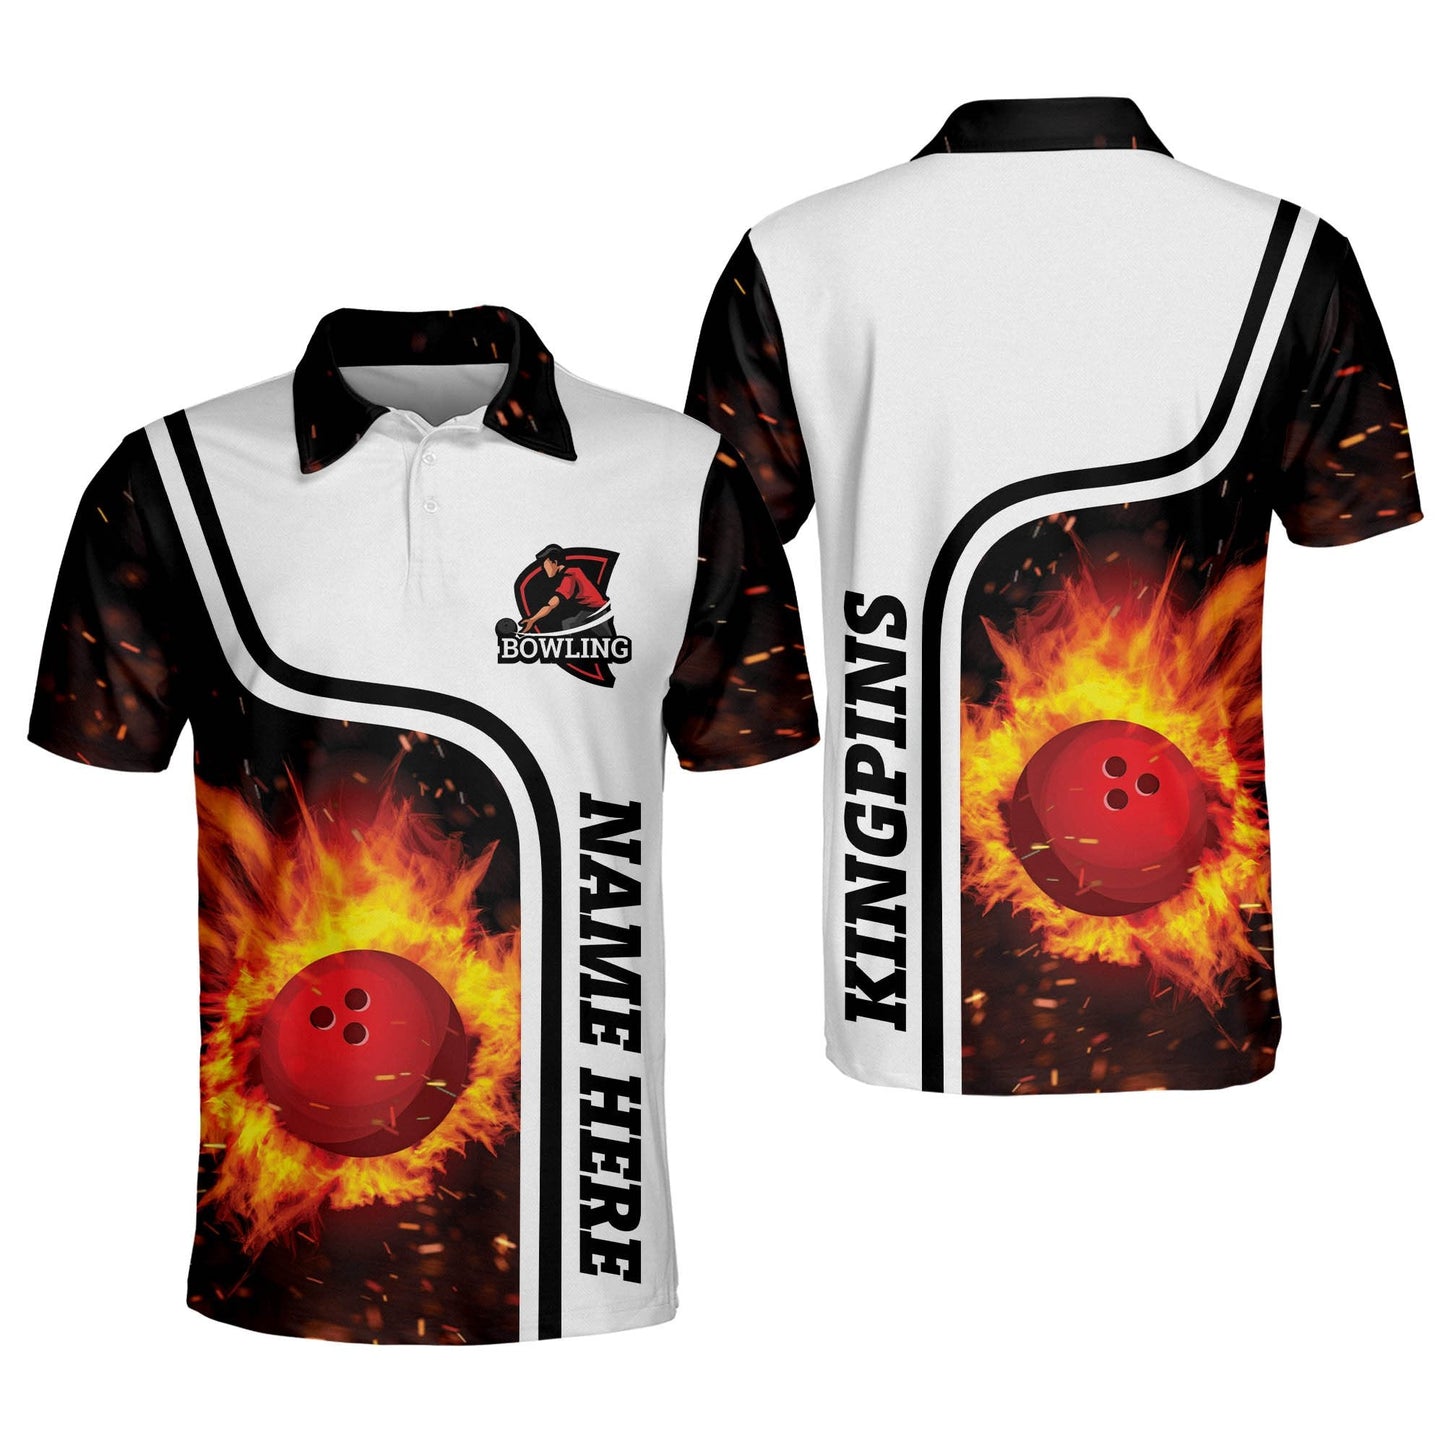 Custom Bowling Shirts For Men - Personalized Bowling Team Shirts Short Sleeve Polo - Crazy Cool Designer Bowling Shirt - Flame Fire Bowling Shirt BM0086